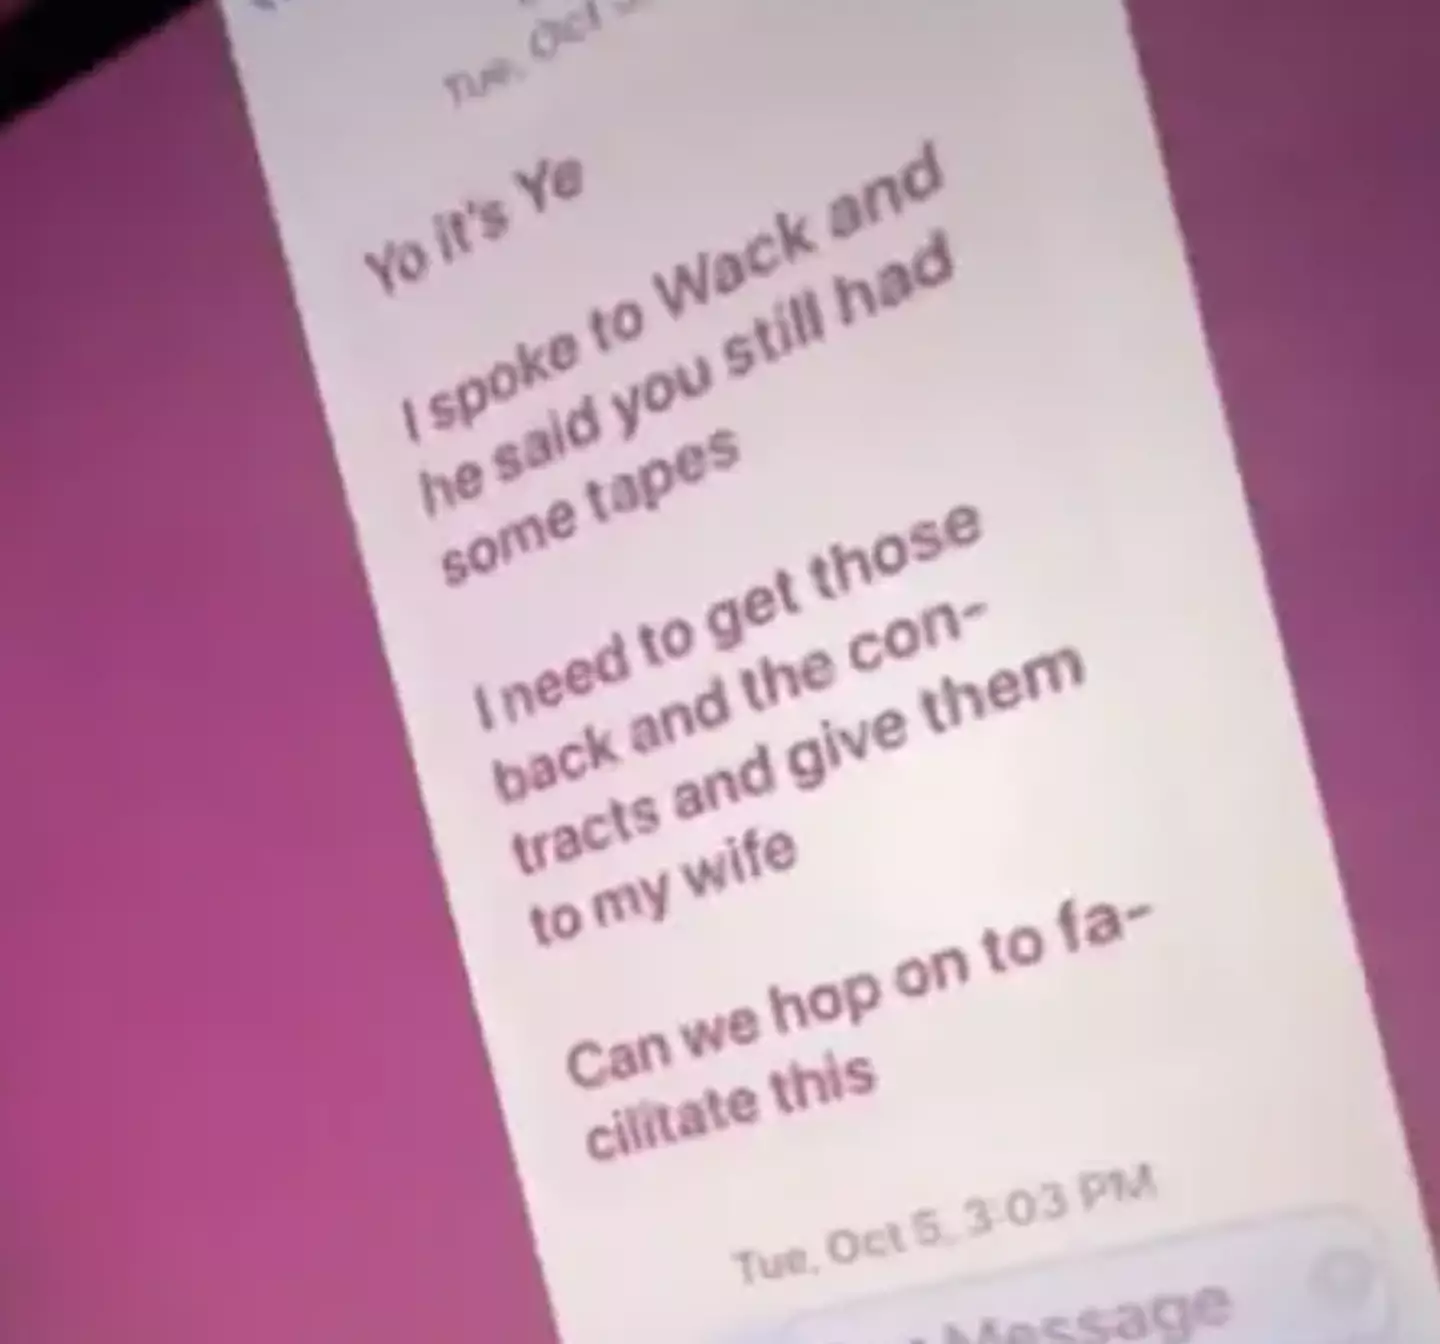 Kanye West appeared to refer to contracts in his messages with Ray J. Credit @rayj/Instagram